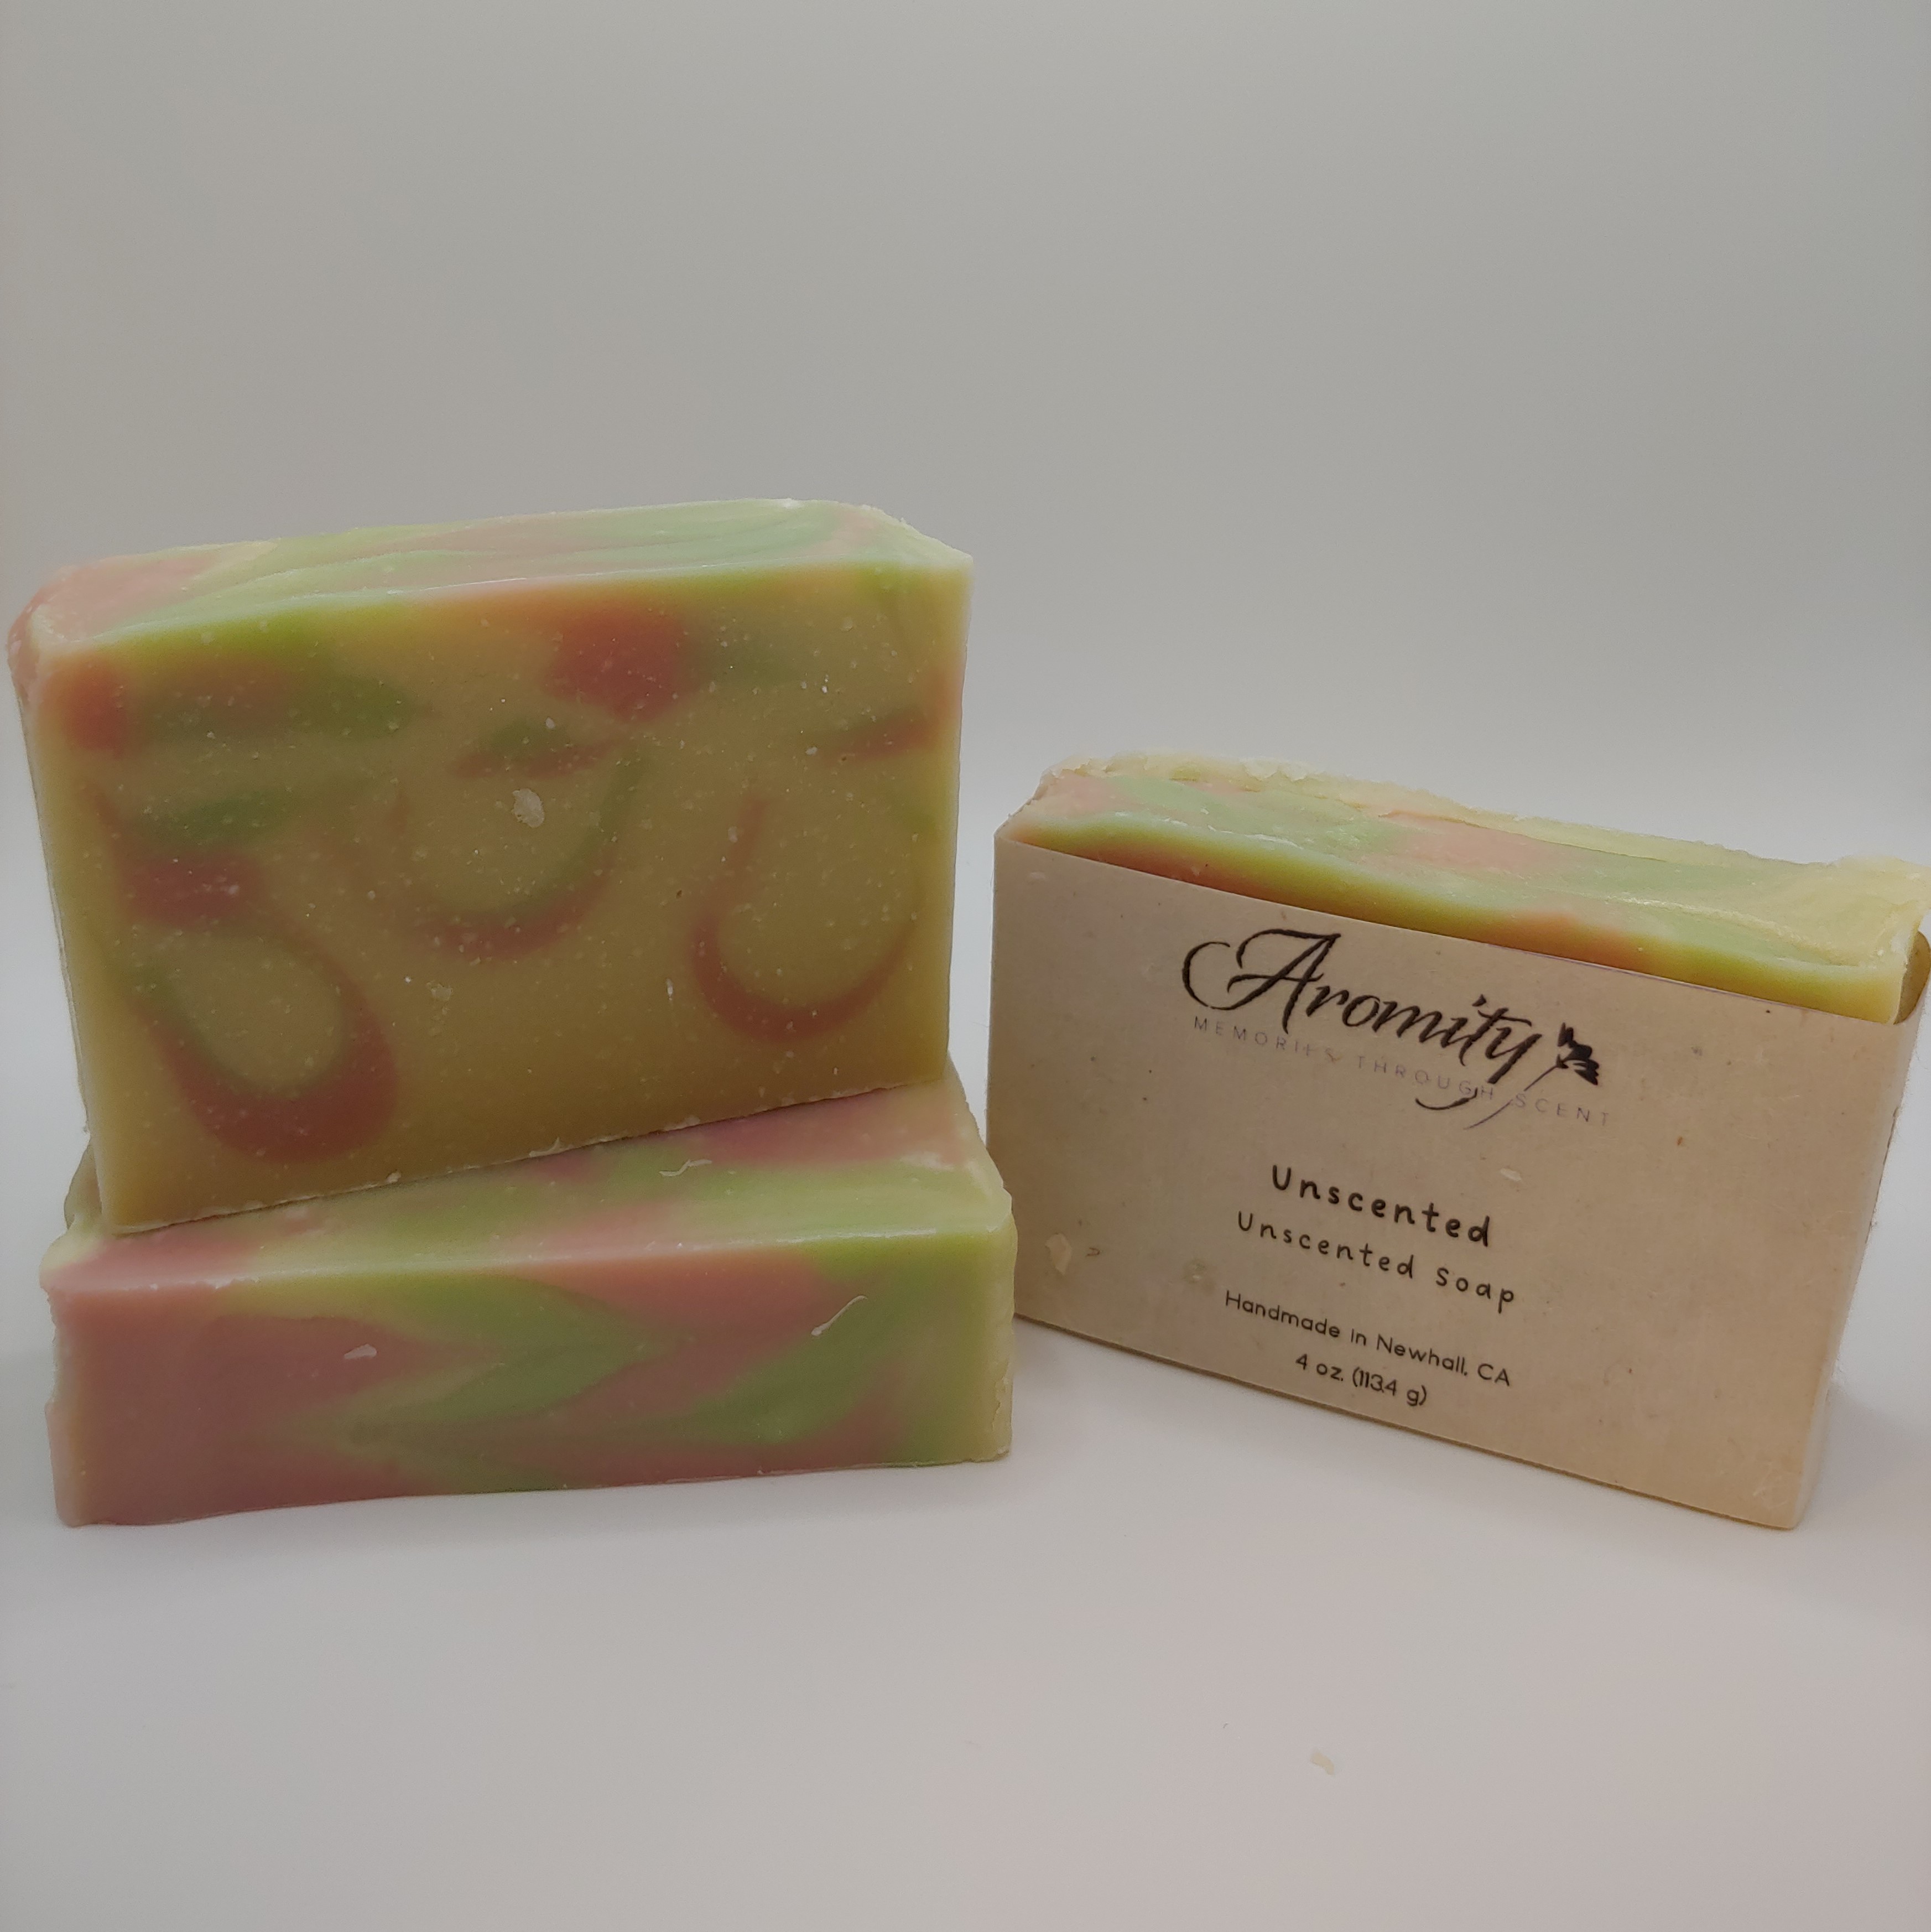 Bath & Beauty :: Soaps & Washes :: Soaps :: Unscented Soap